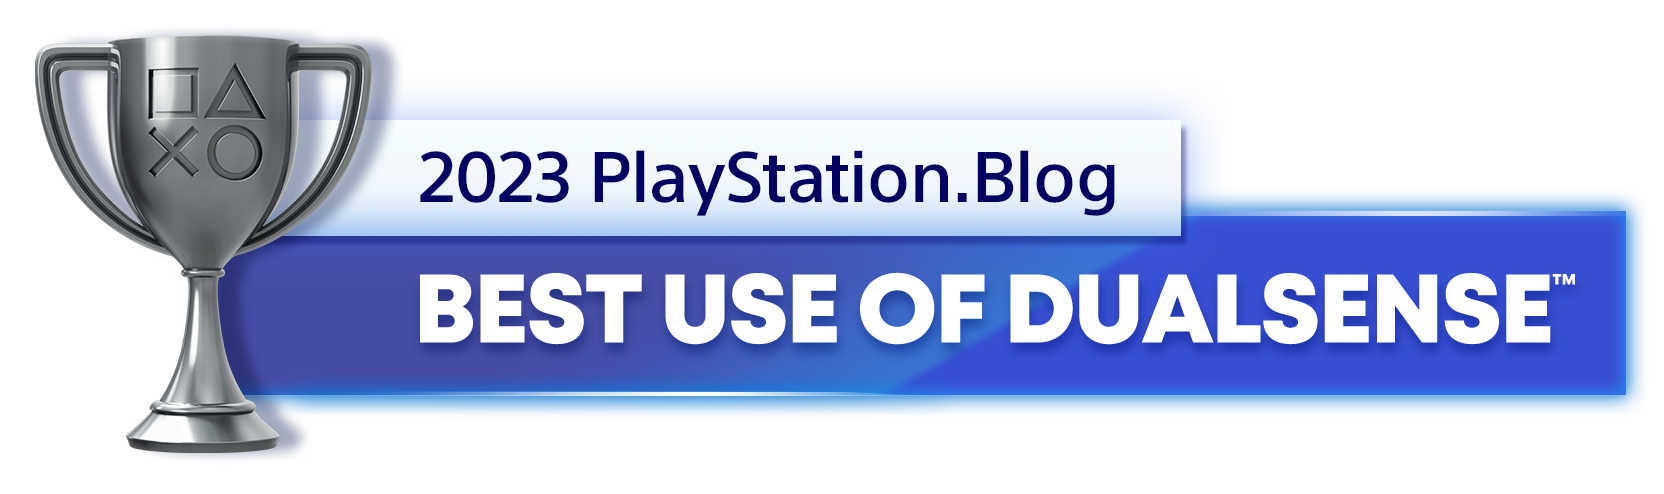  Silver Trophy for the 2023 PlayStation Blog Best Use of DualSense Controller Winner